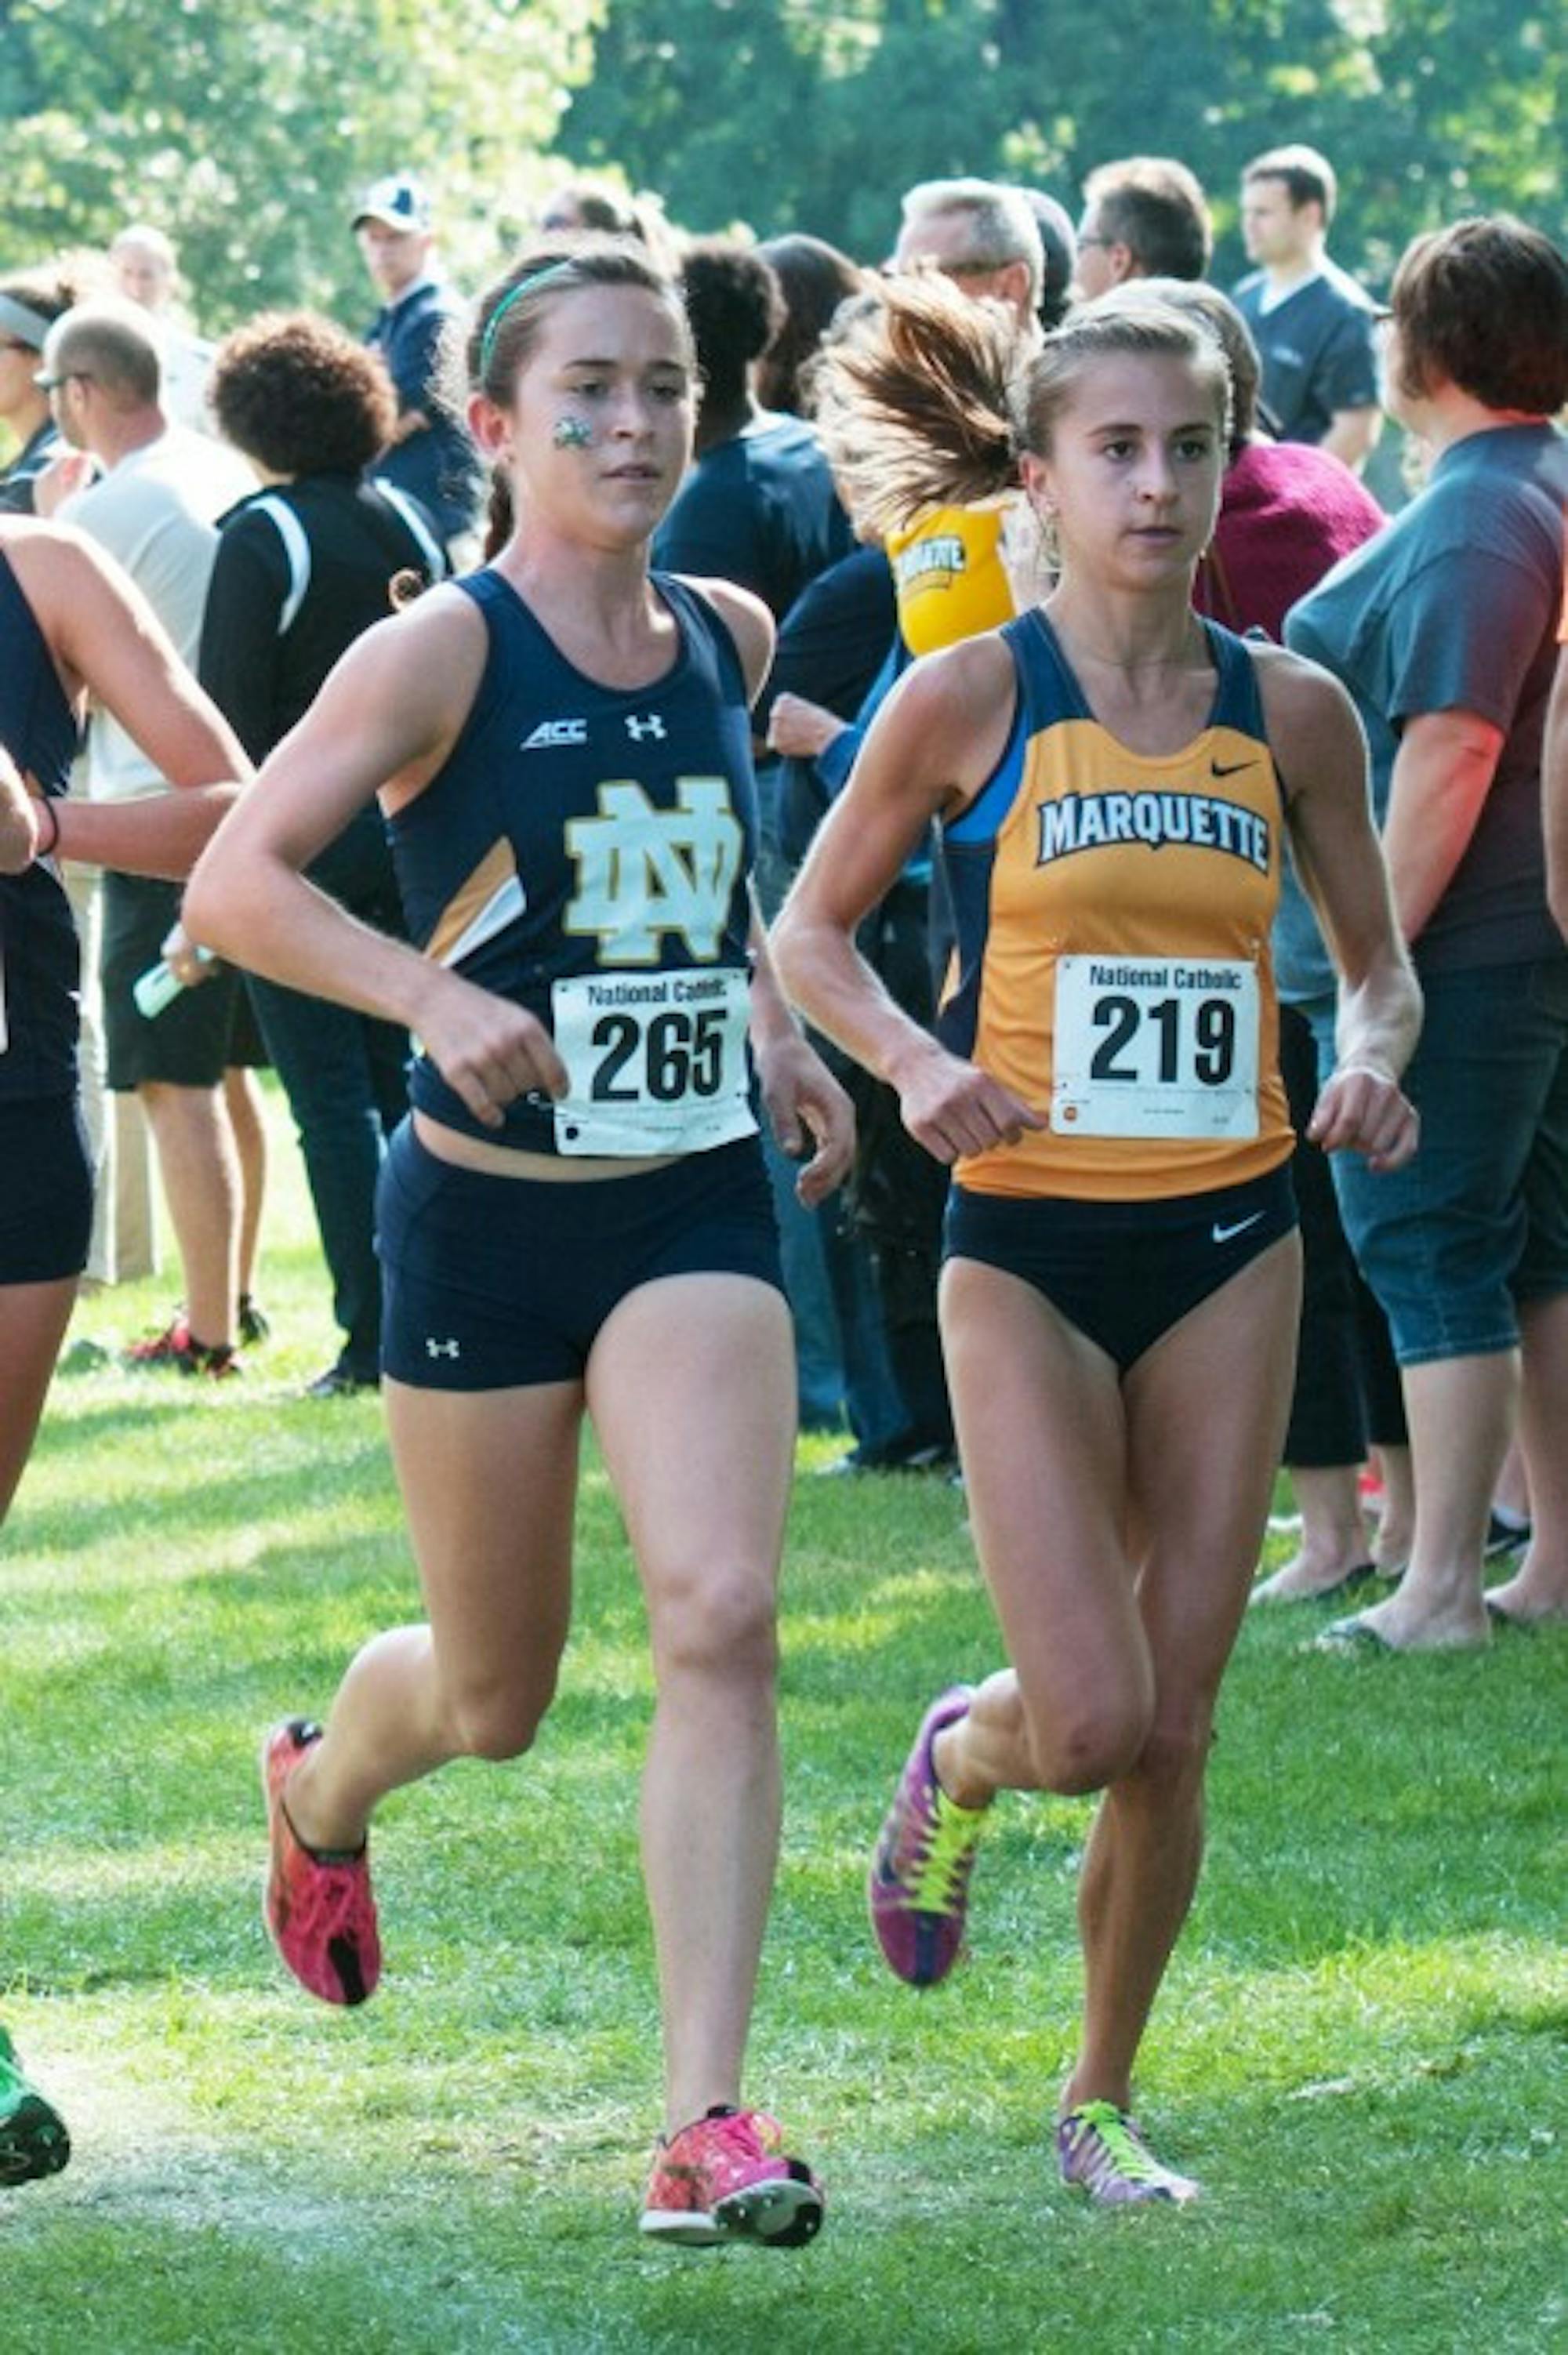 Irish senior Molly Seidel, No. 265, leads the pack during the National Catholic Championships on Sept. 19, 2014, at Notre Dame Golf Course. Seidel won the race, and the Irish women won the event as a team.